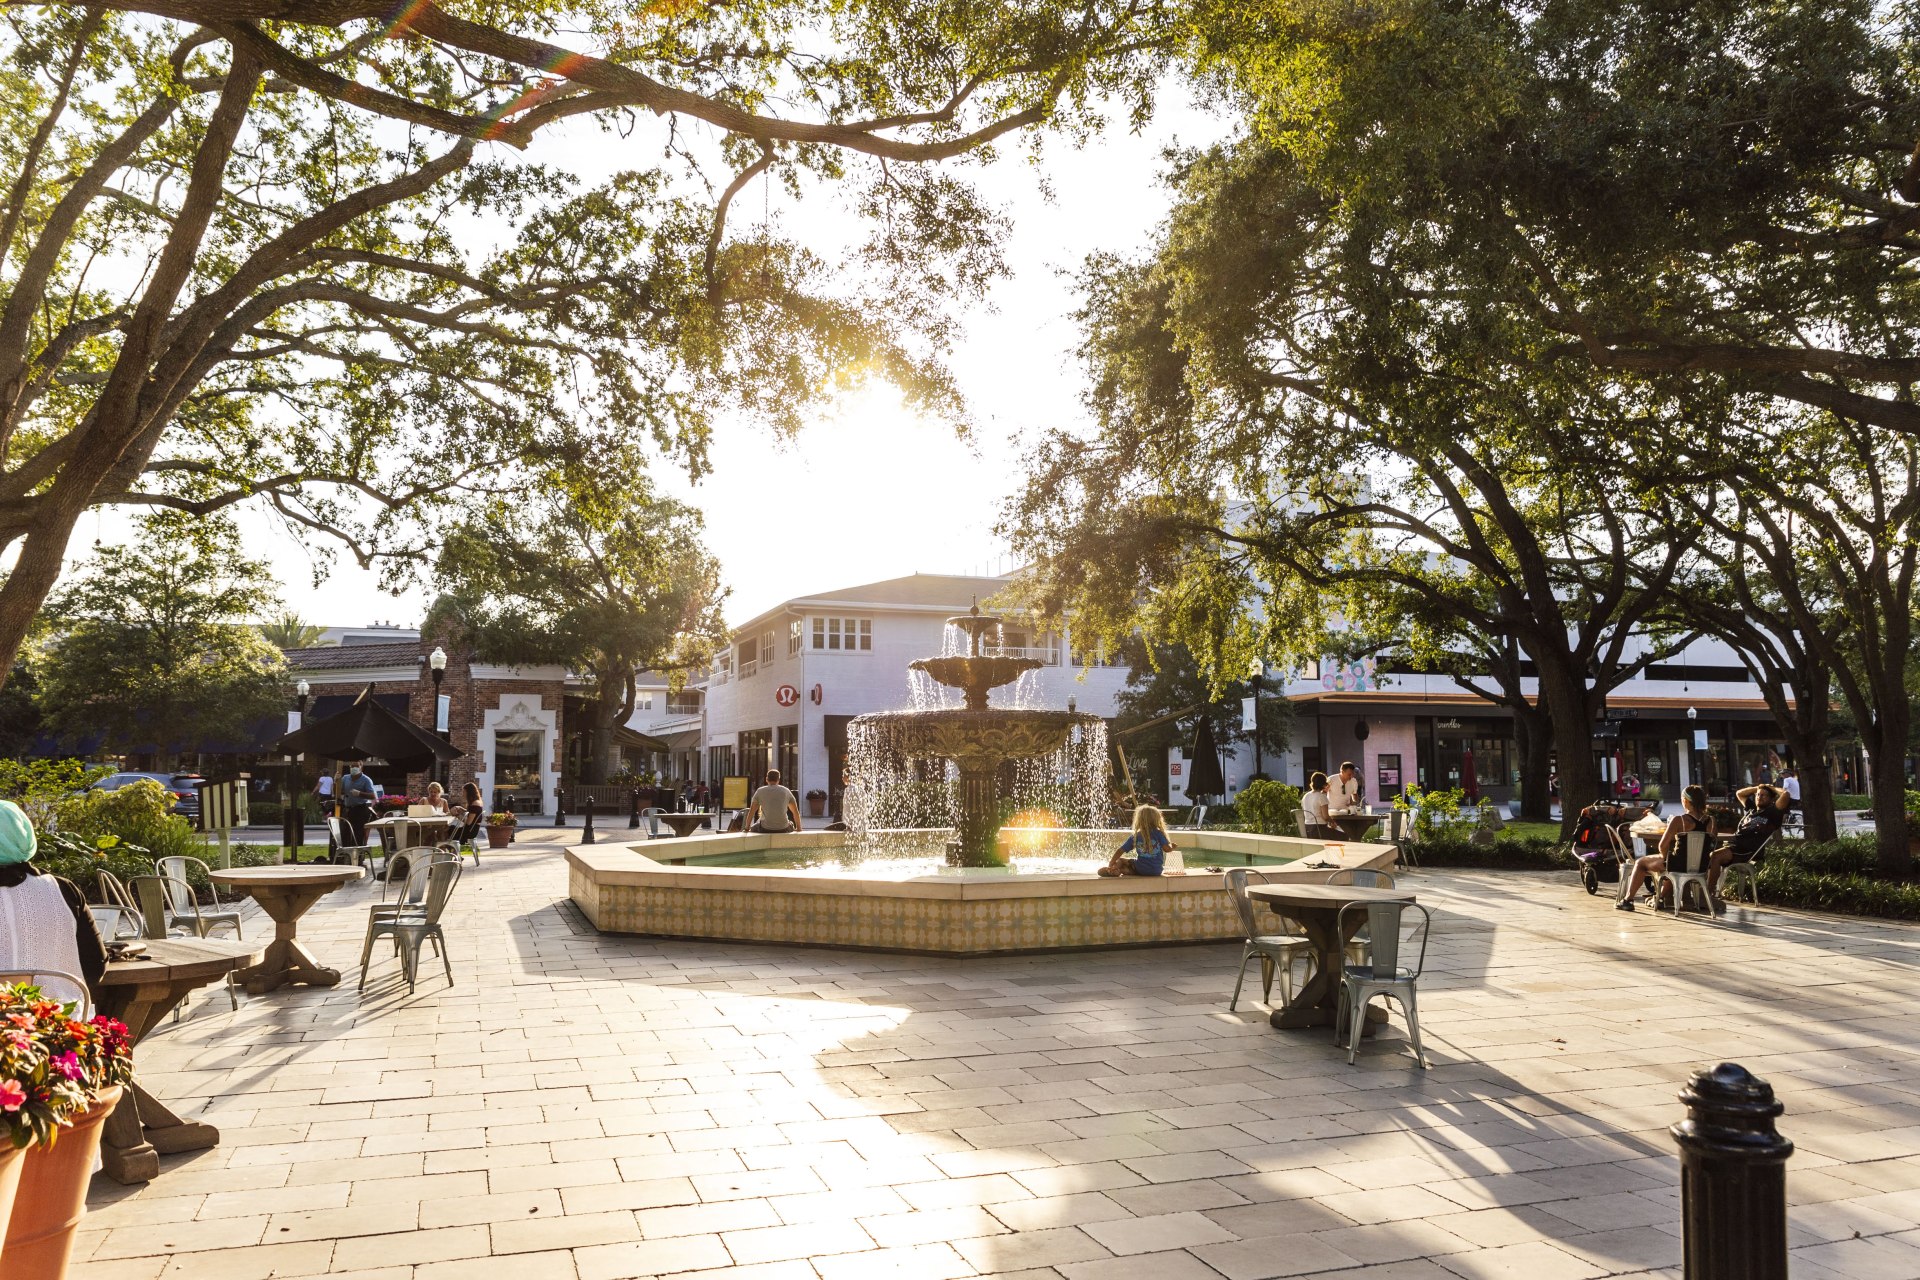 Hyde Park Village offers luxury amenities to locals and visitors alike. (Credit: Keir Magoulas/Visit Tampa Bay)